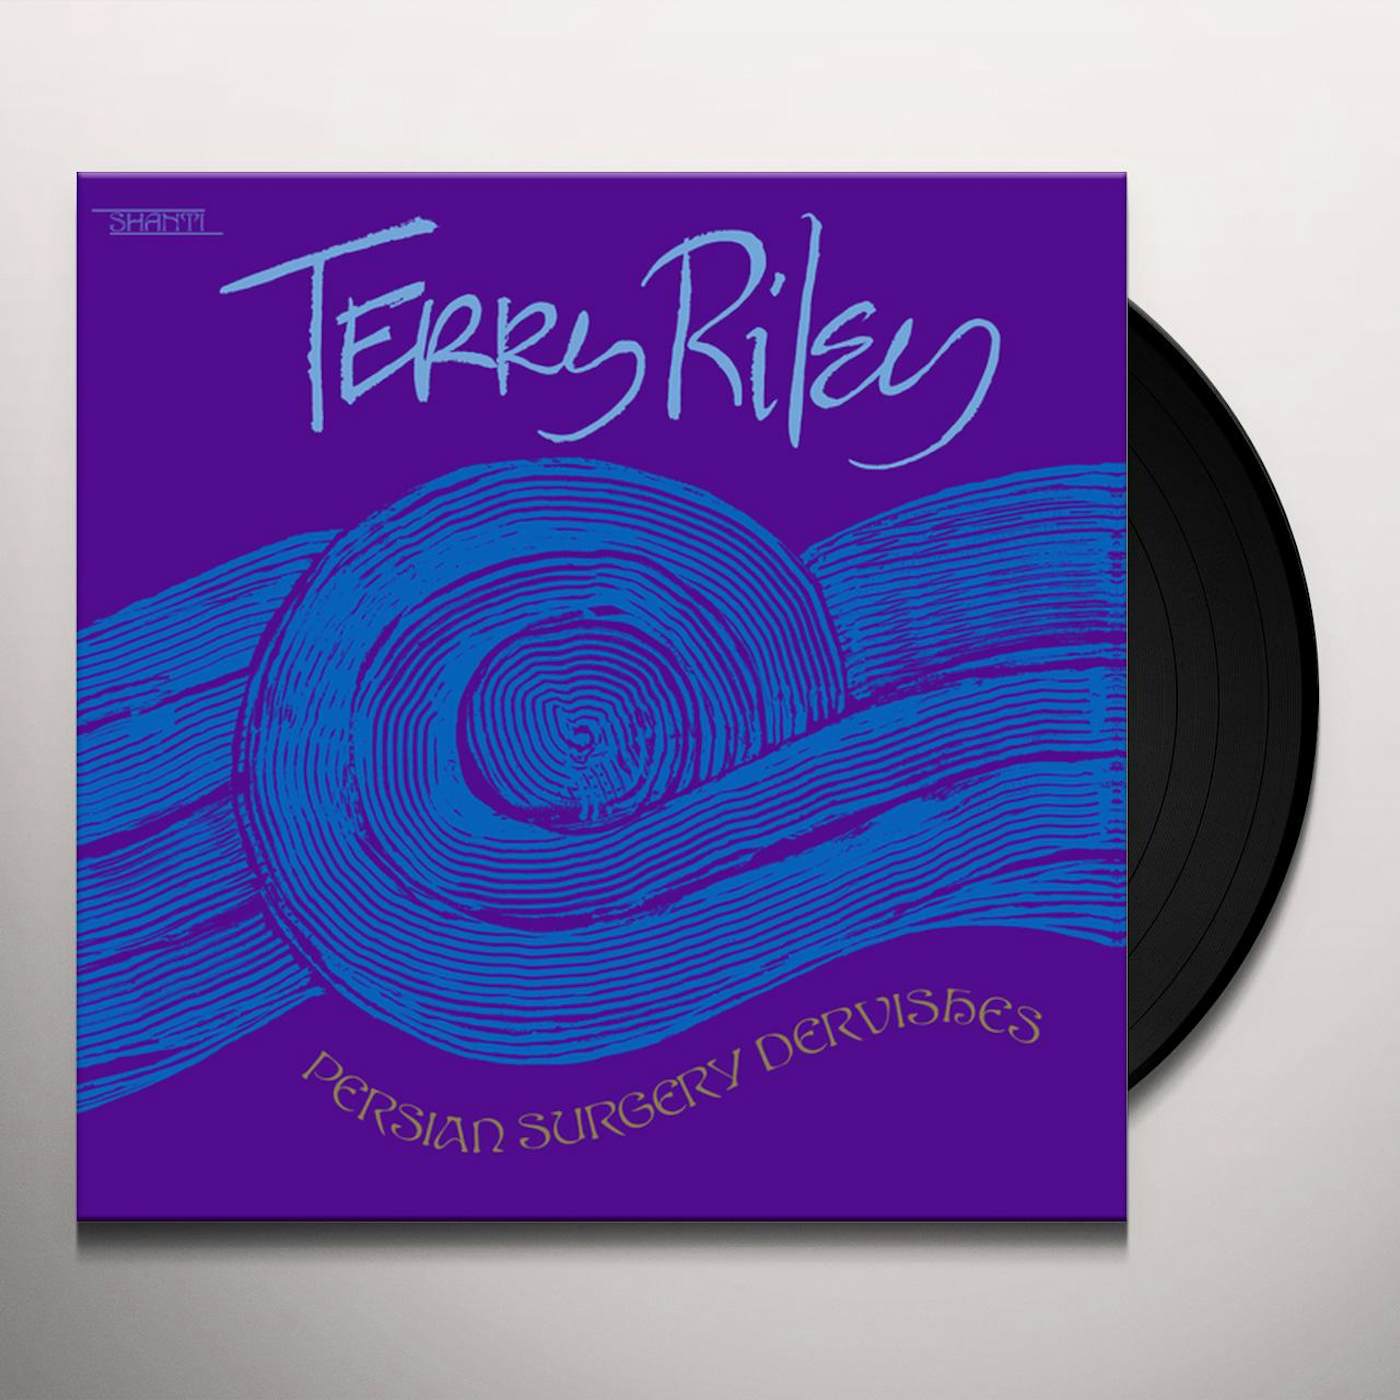 Terry Riley Persian Surgery Dervishes Vinyl Record